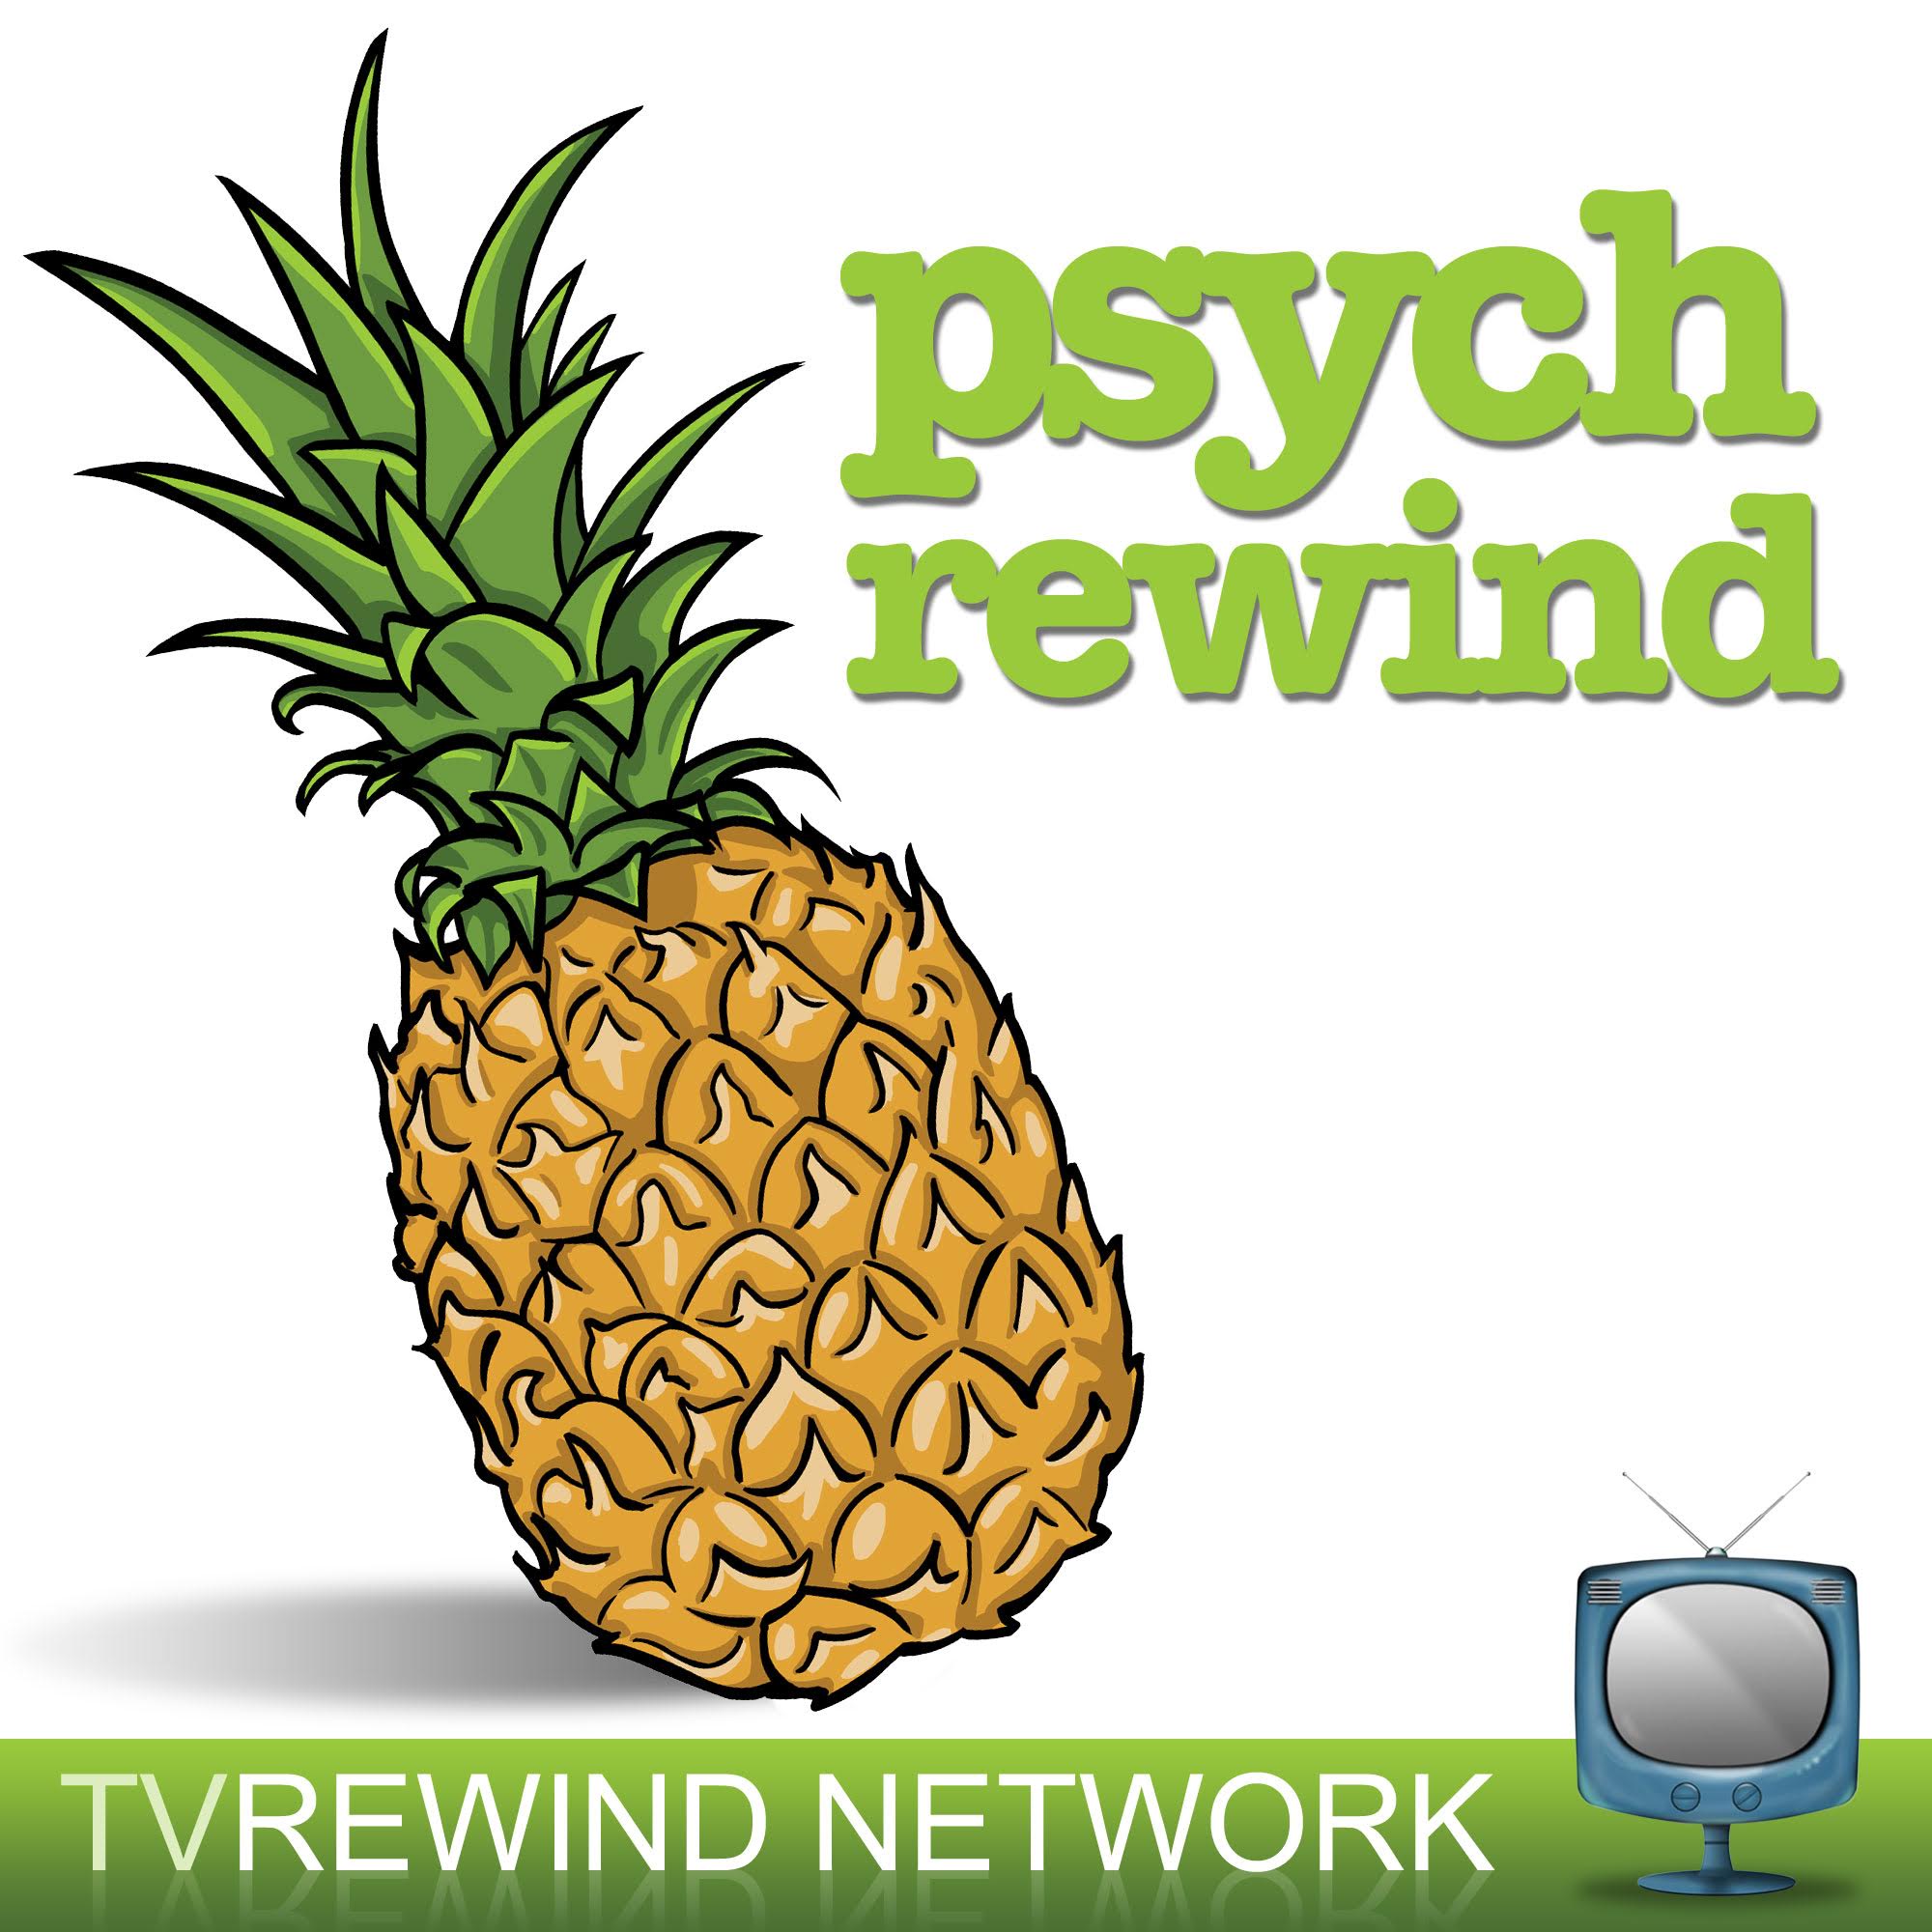 PR – Special Edition – Psych the Movie 3 Review